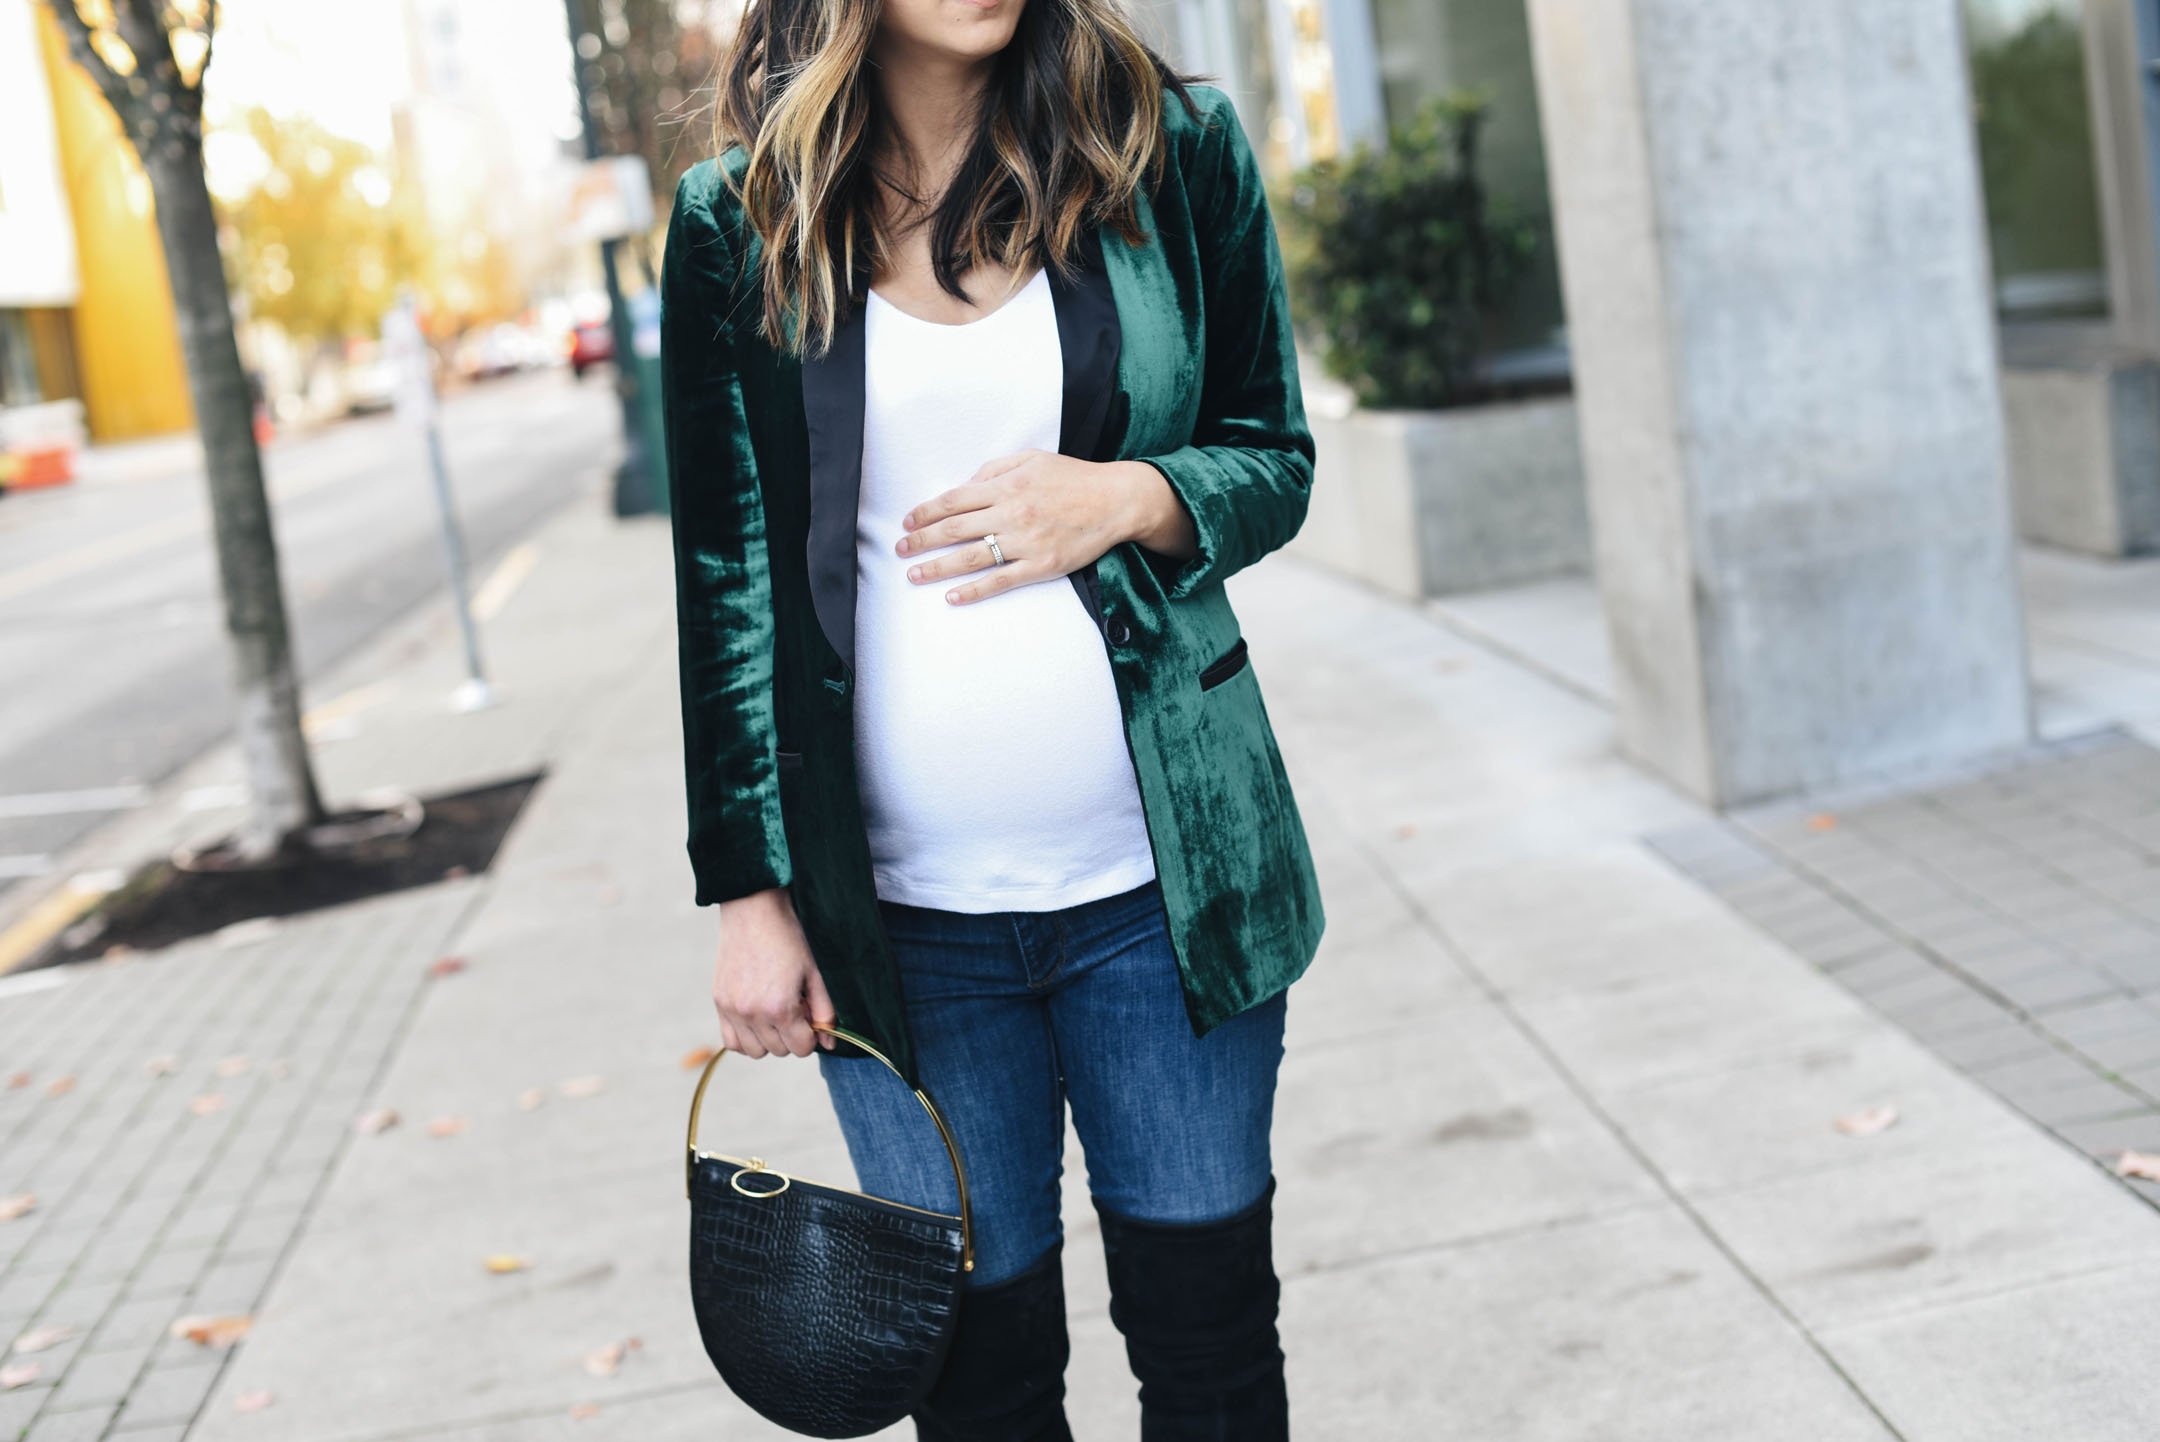 Holiday festive outfit ideas